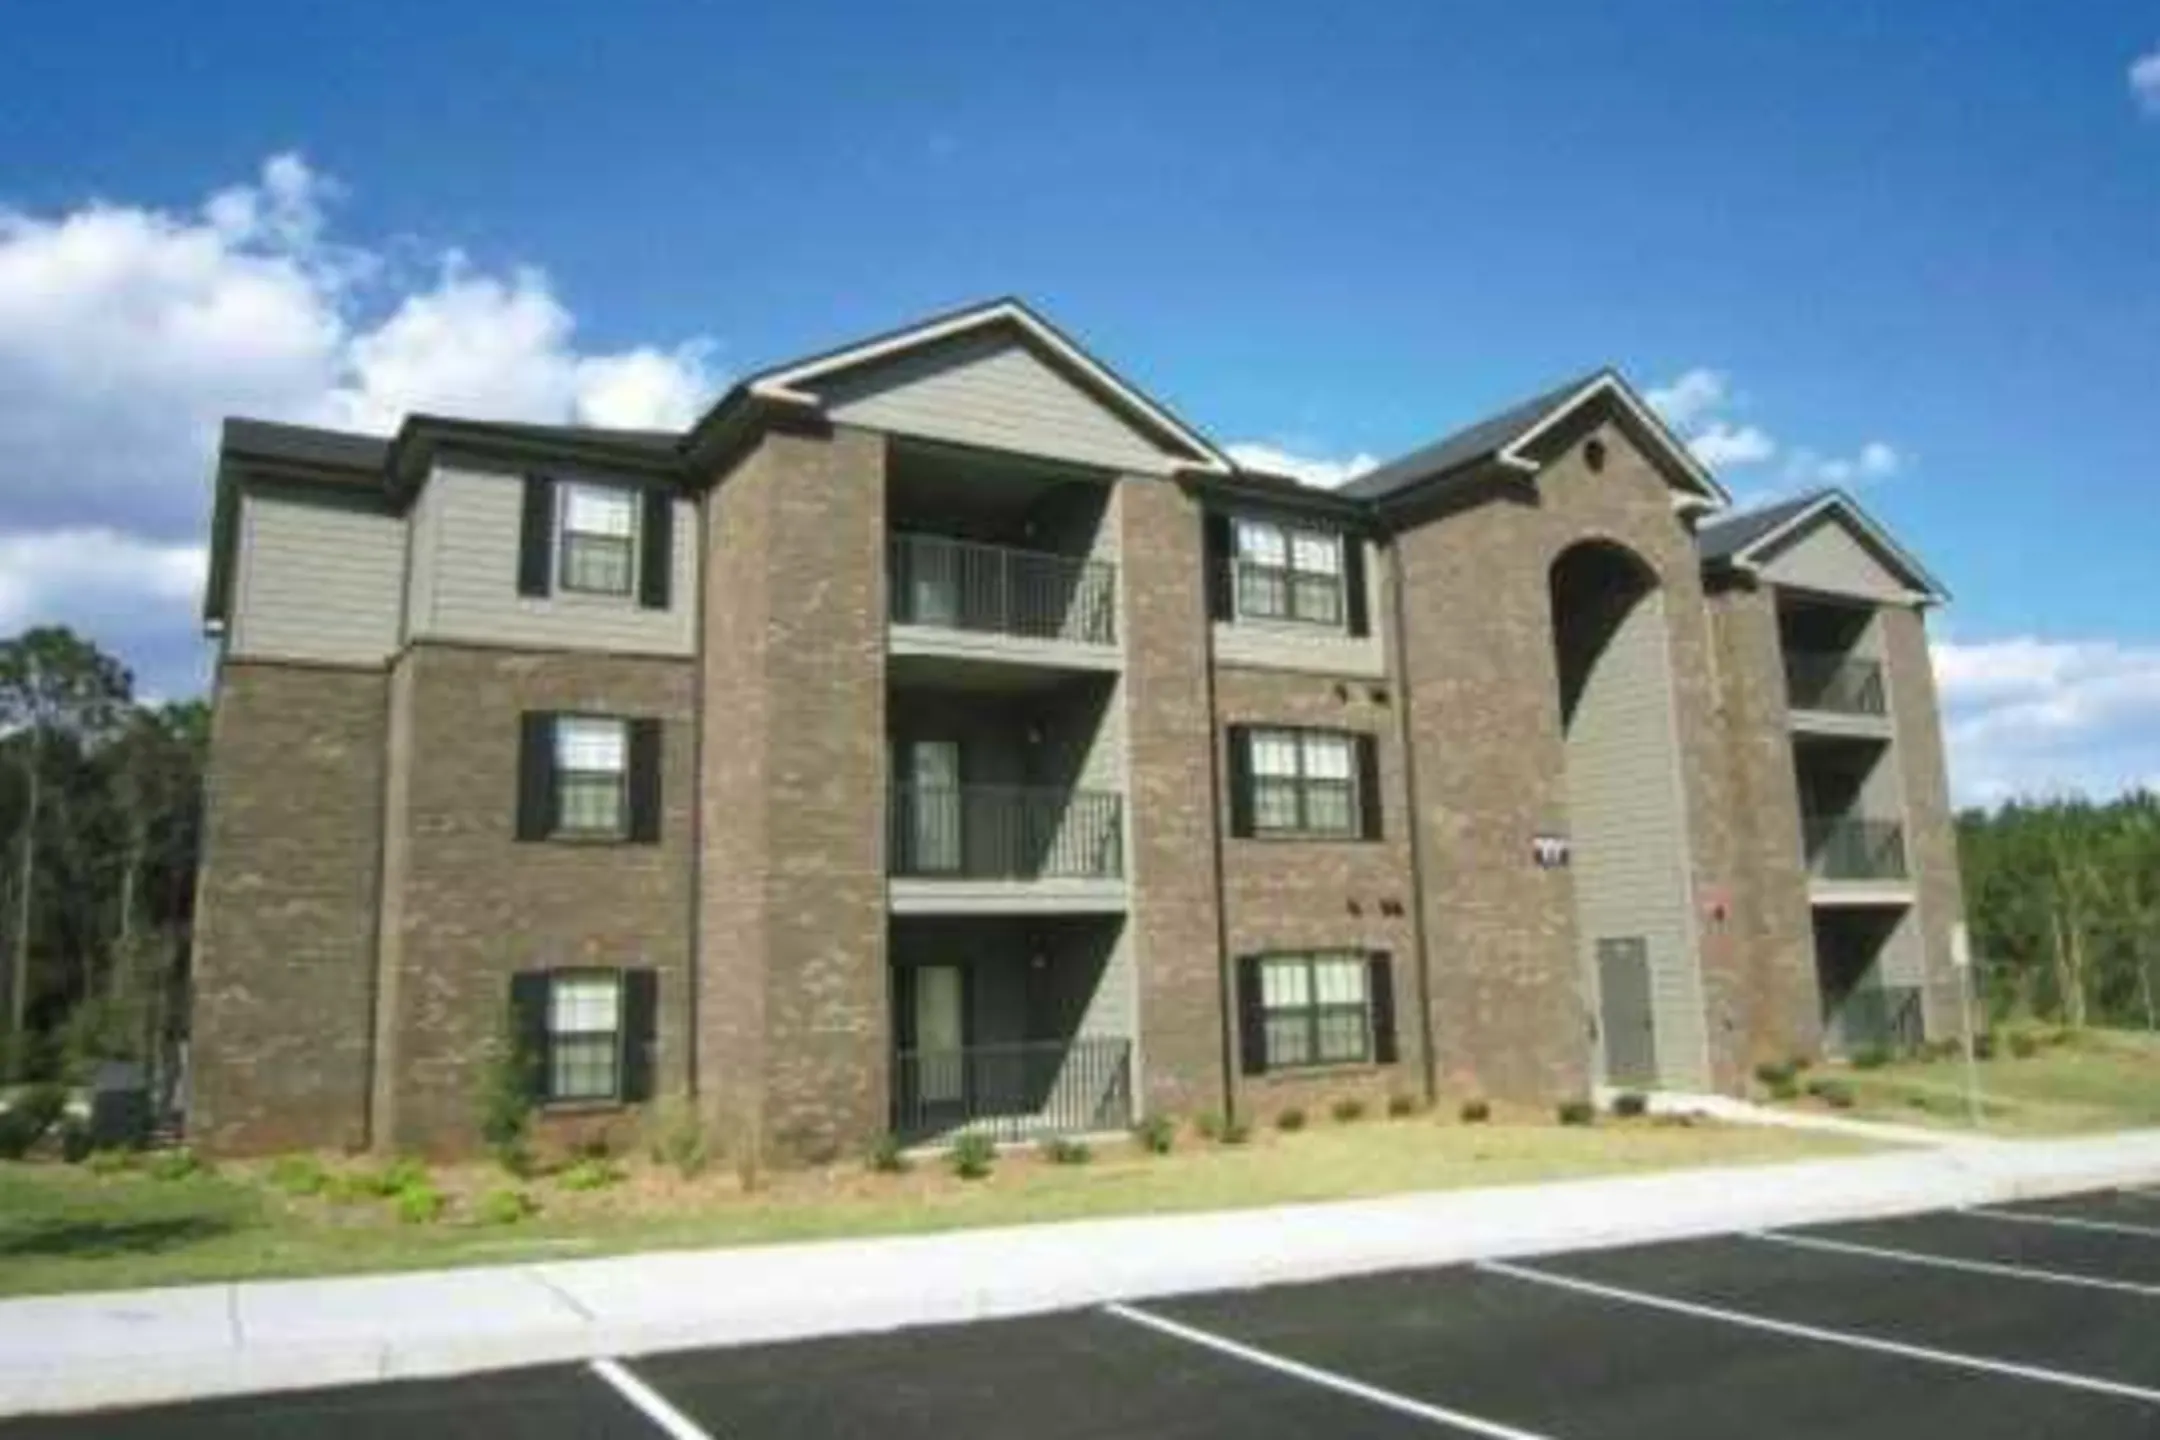 Building - Forest Hill Apartment Homes - Mobile, AL